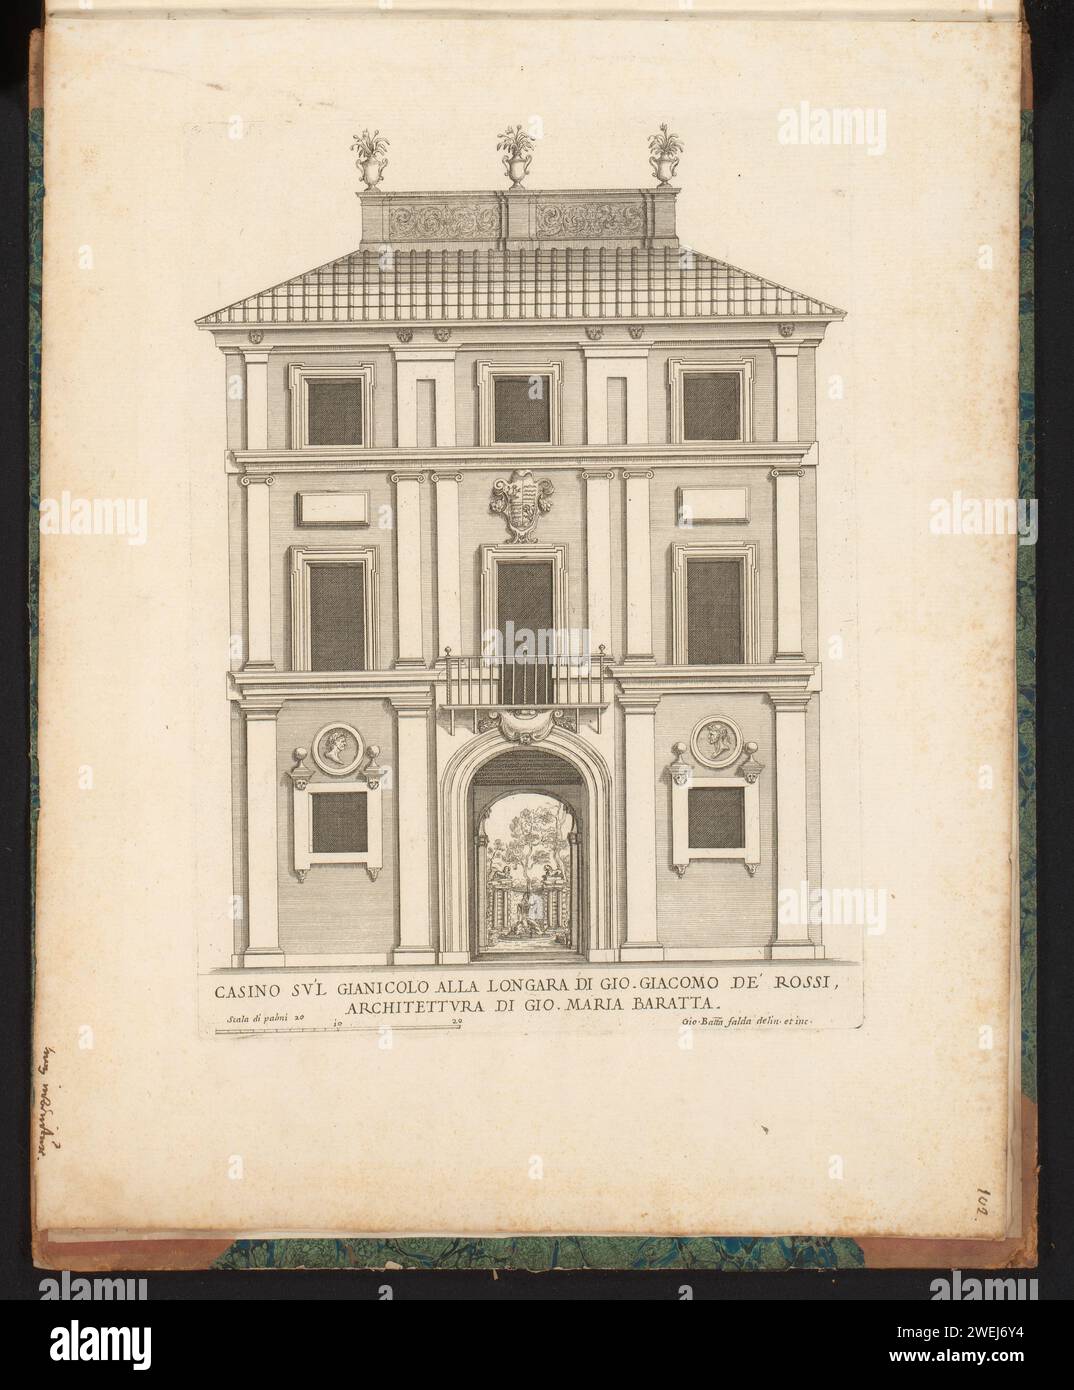 Façade Van Het Casino Te Gianicolo in Lungara, Giovanni Battista Fonda, After Giovanni Maria Baratta, in OR After 1655 print Print is part of an album.  paper etching palace. façade (of house or building). casino Janiculum Stock Photo